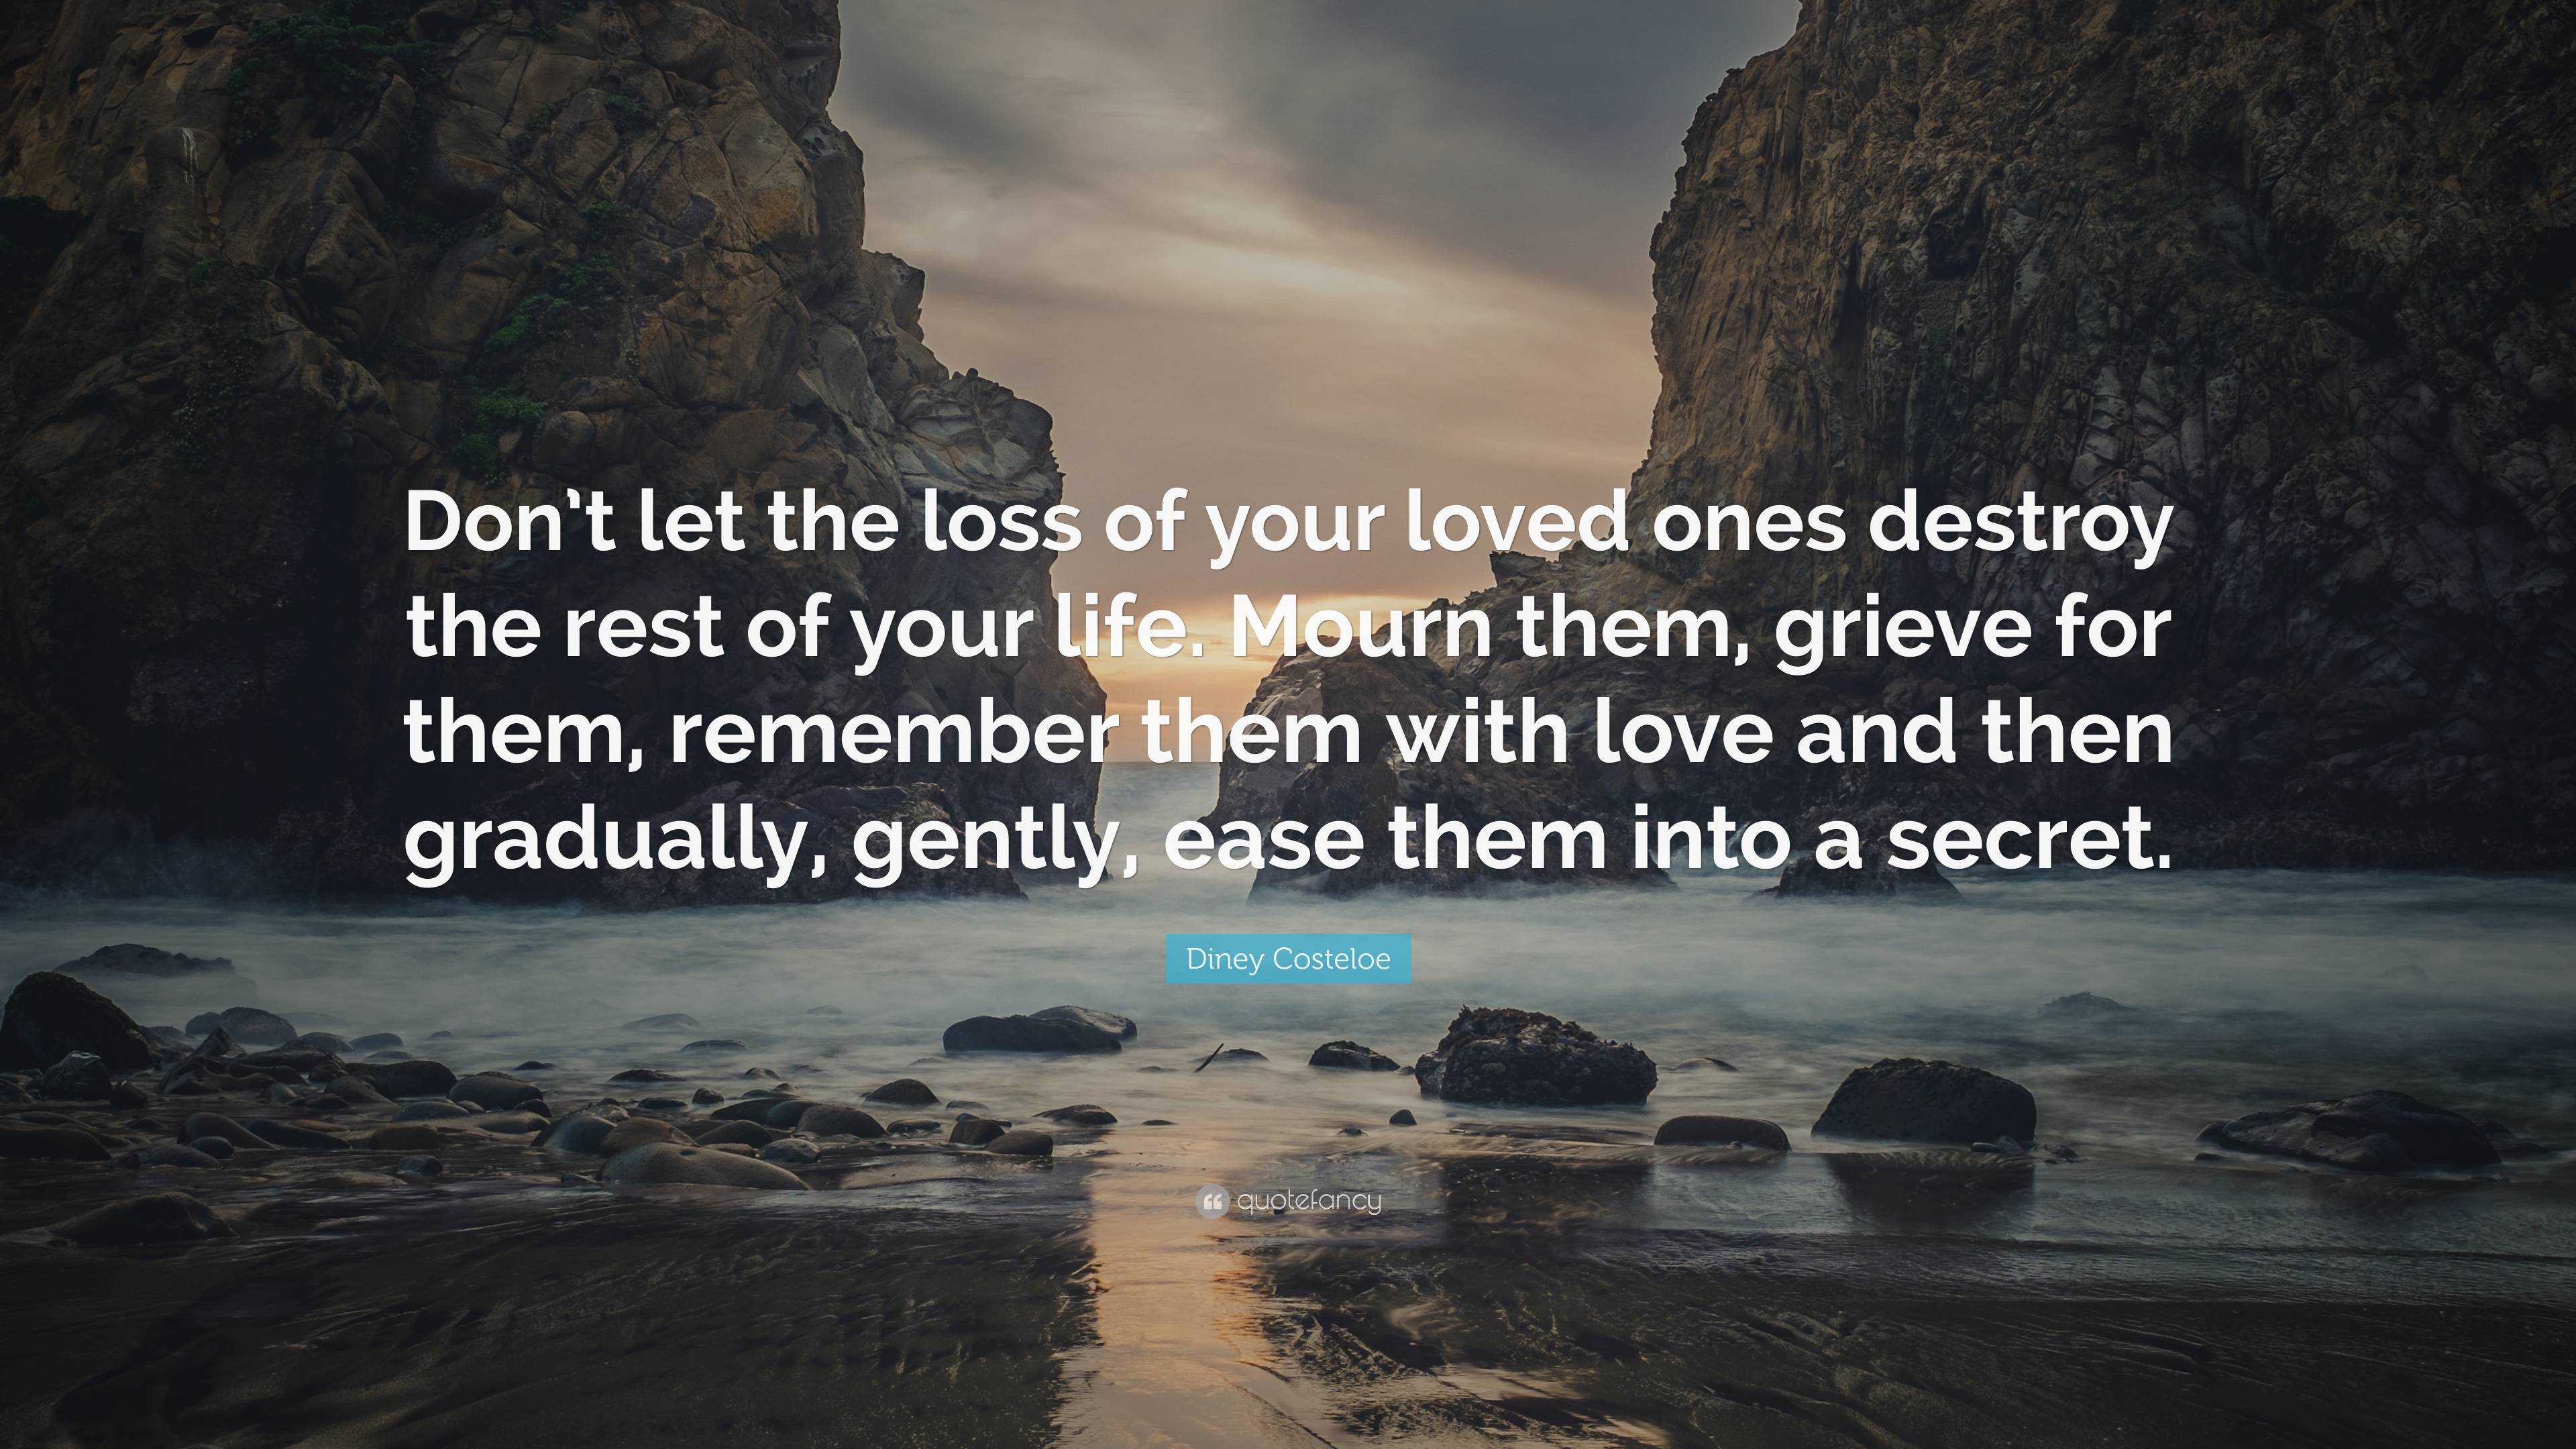 Diney Costeloe Quote: “Don’t let the loss of your loved ones destroy ...